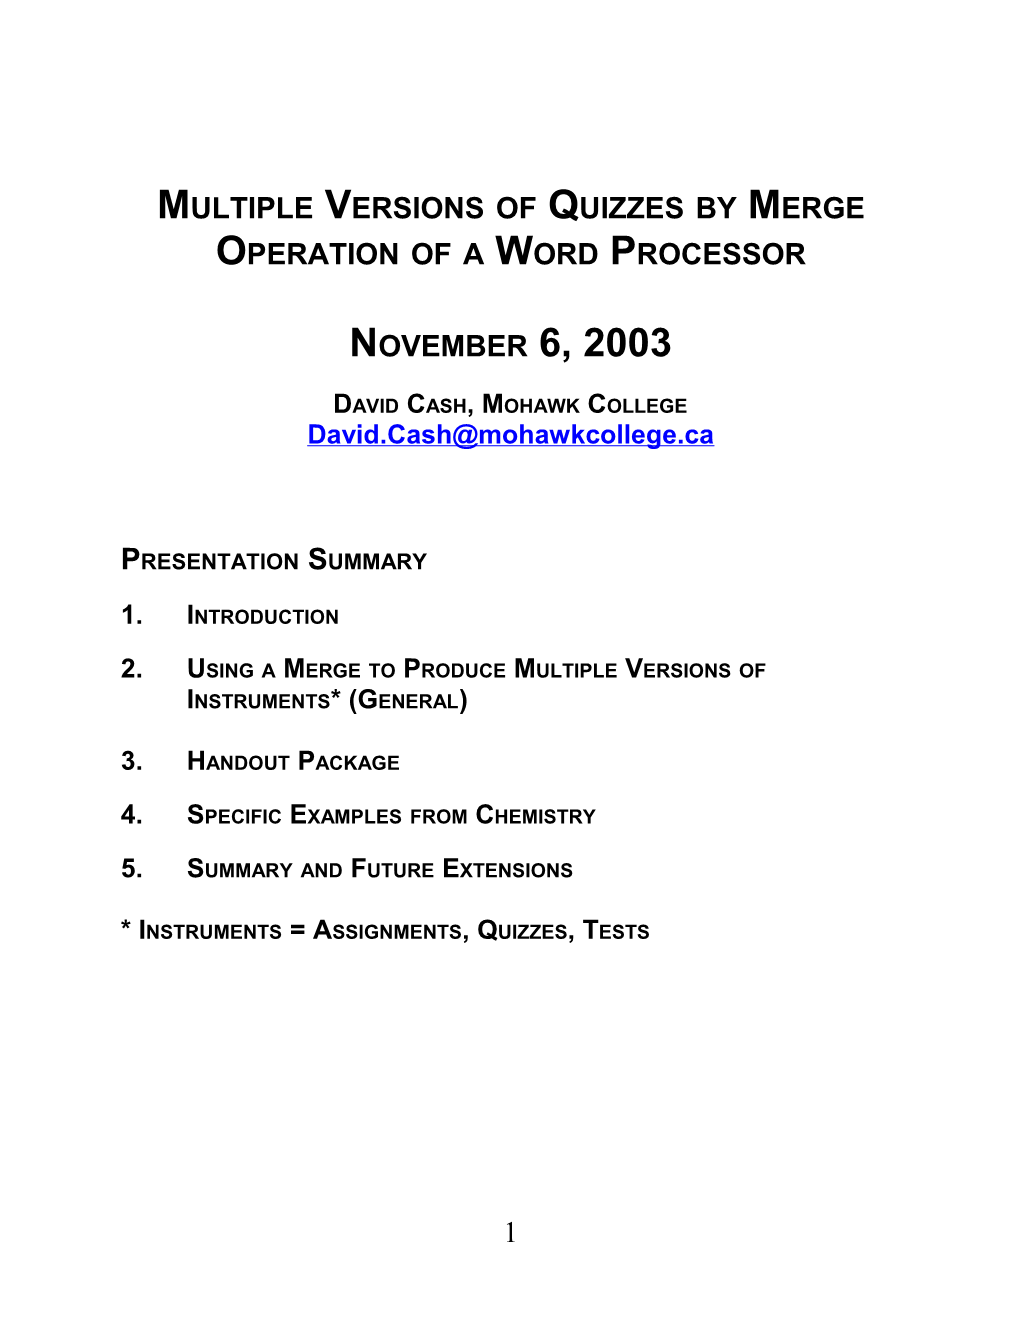 Multiple Versions of Quizzes by Merge Operation of a Word Processor